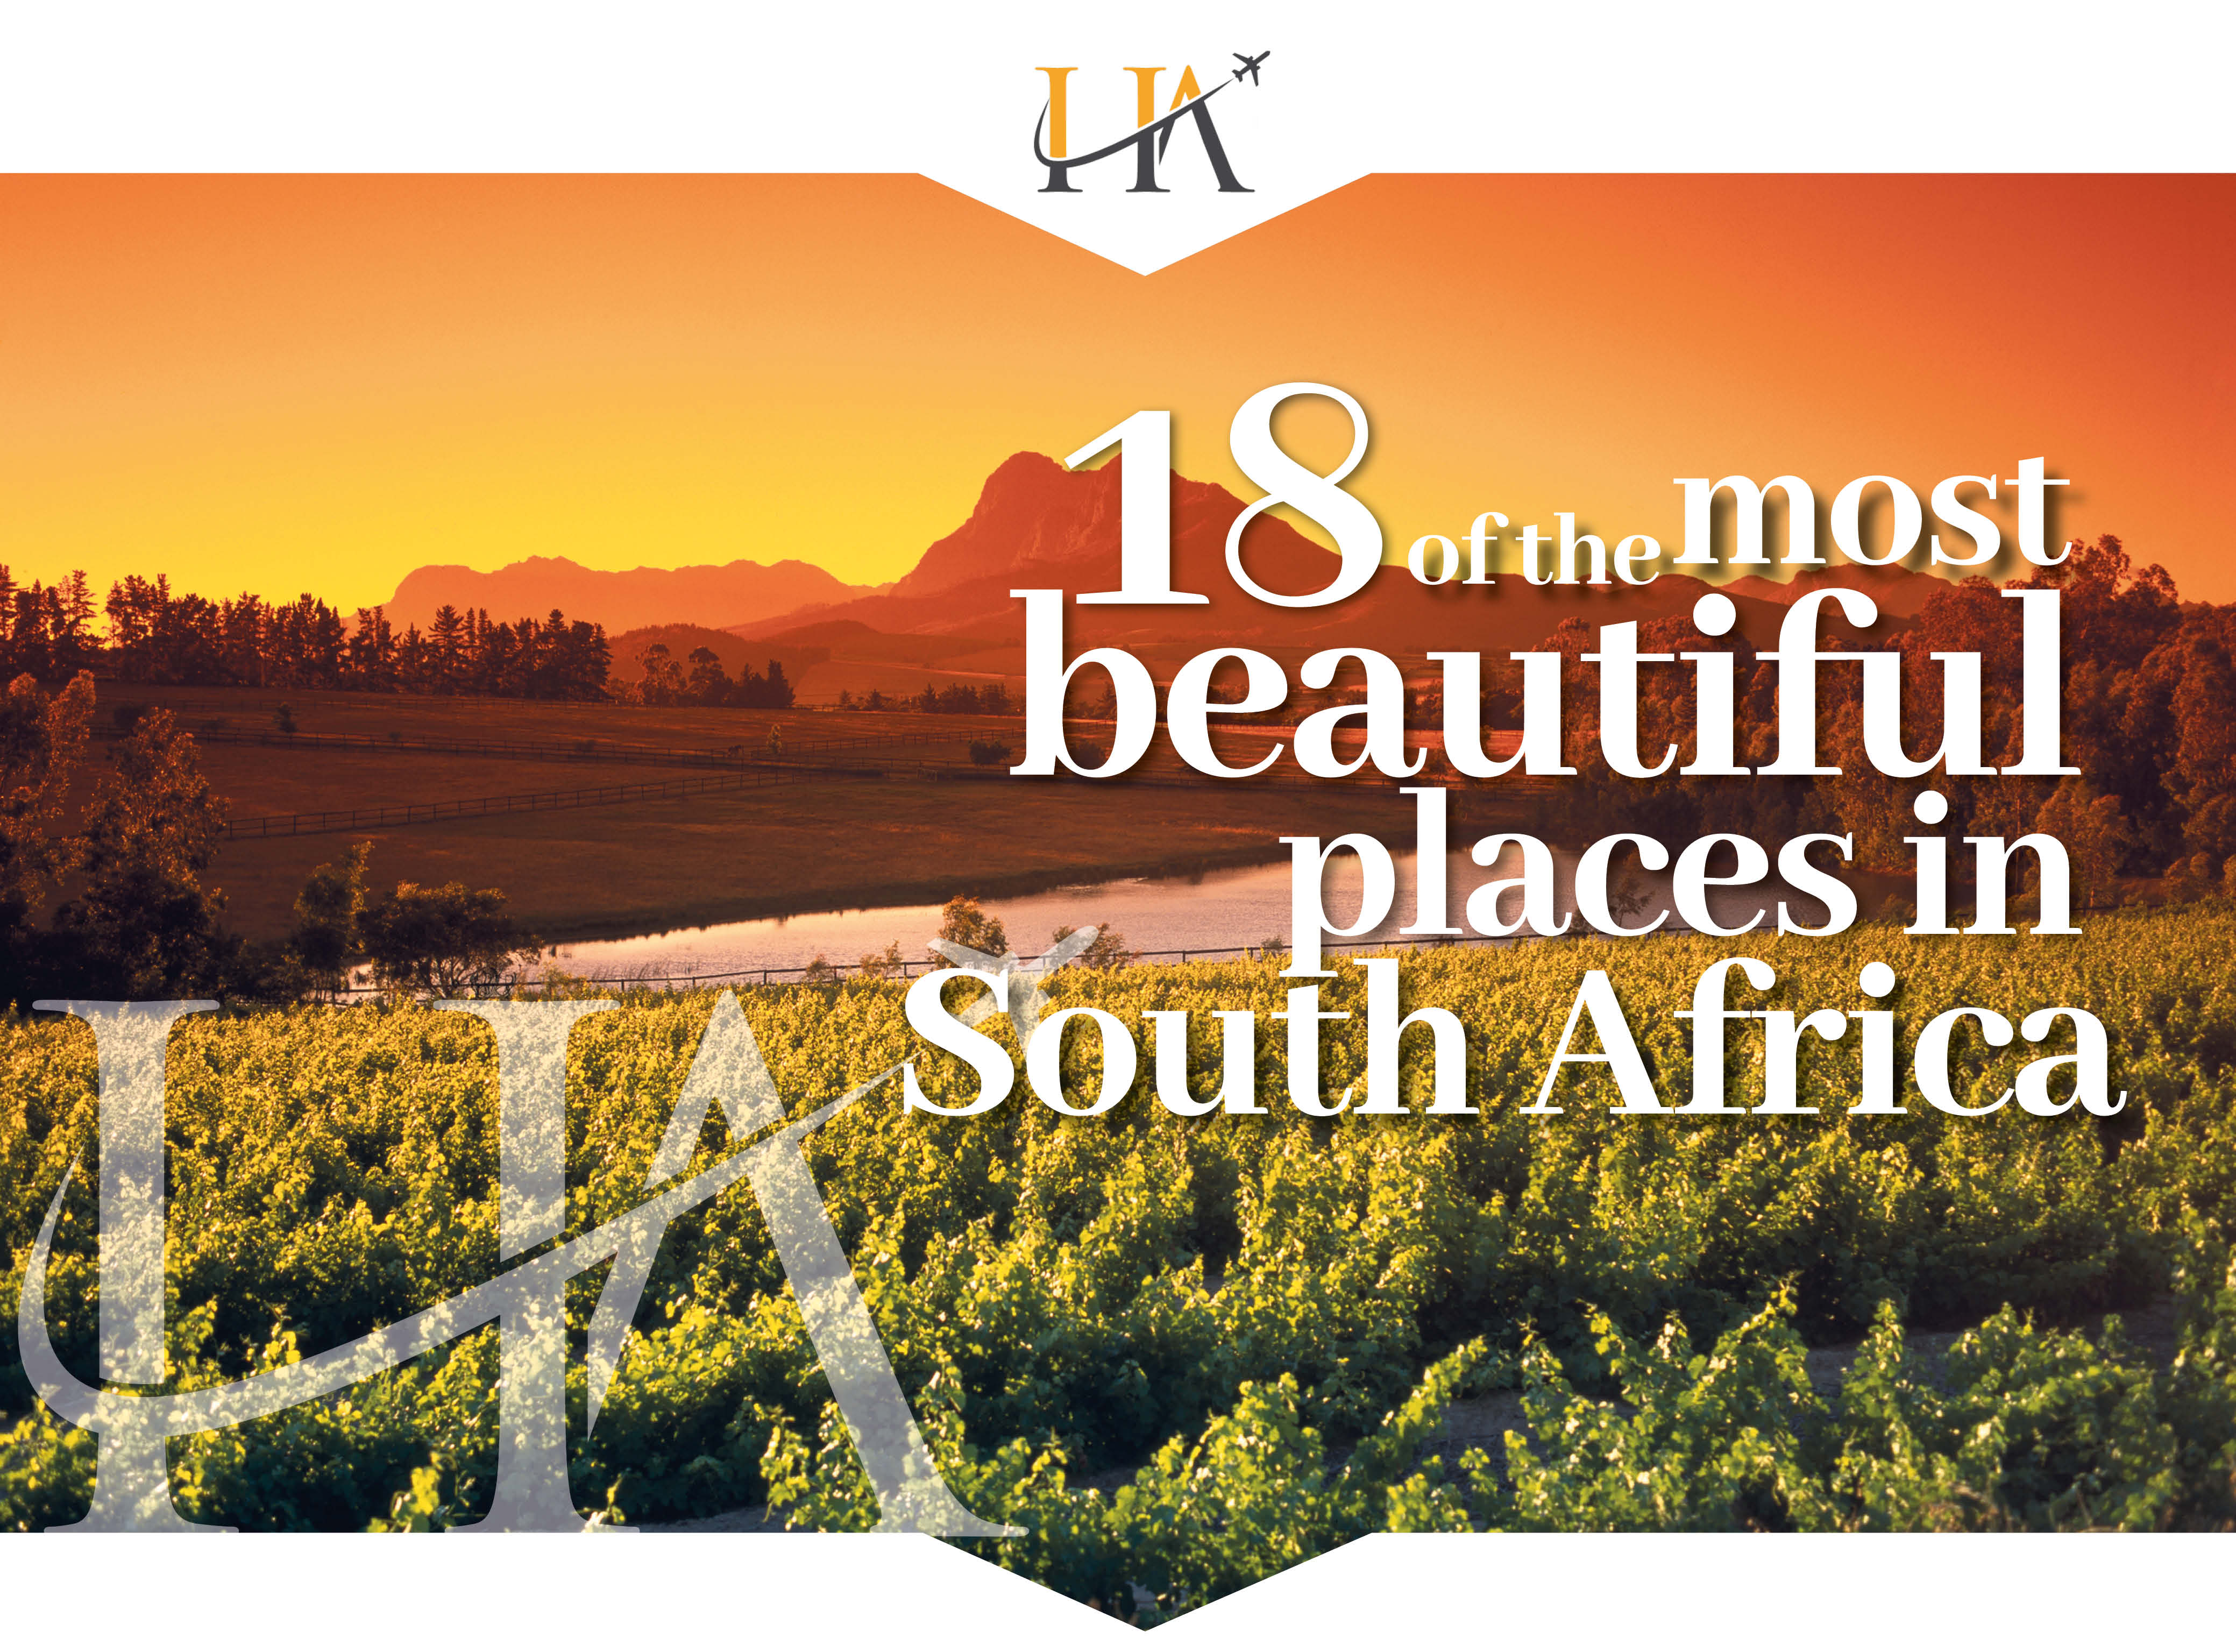 18 of the most beautiful places in South Africa